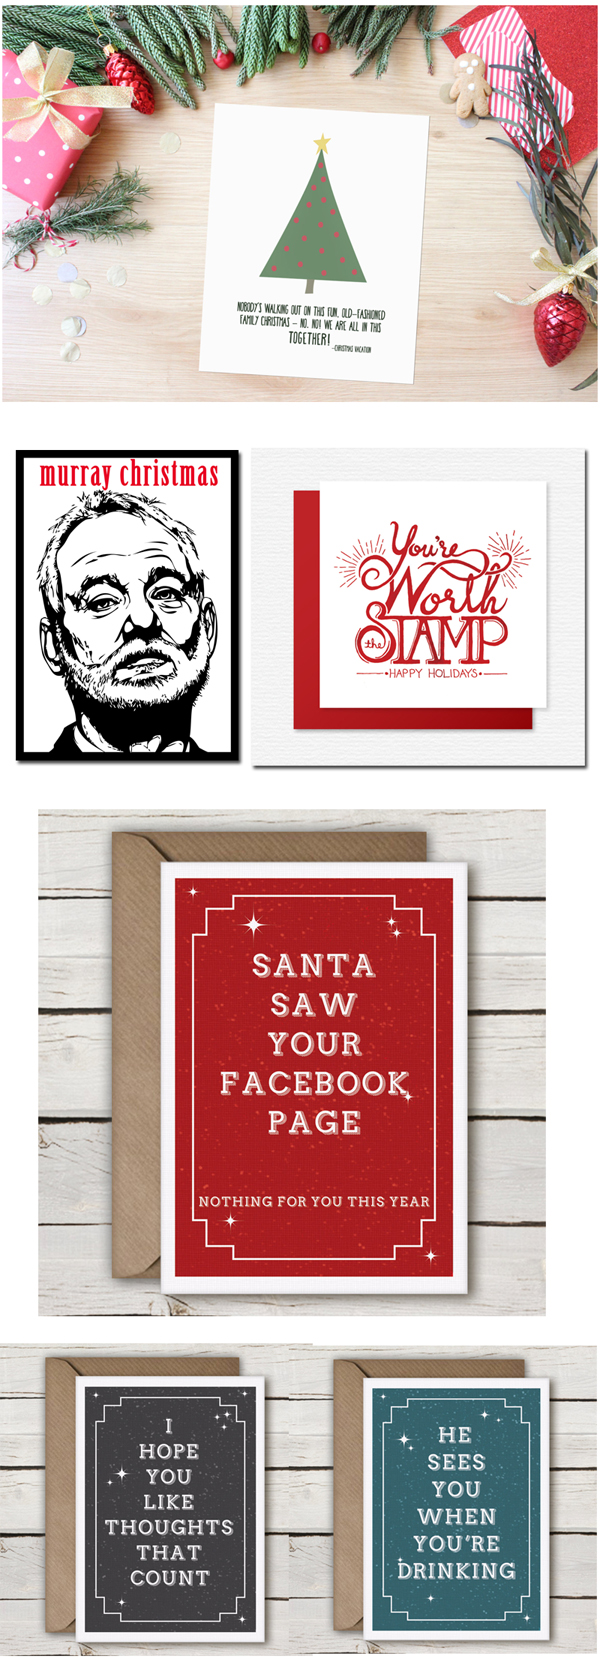 My Last-Minute Christmas Card Solution • littlegoldpixel.com • Funny, cute printable cards from Etsy designers